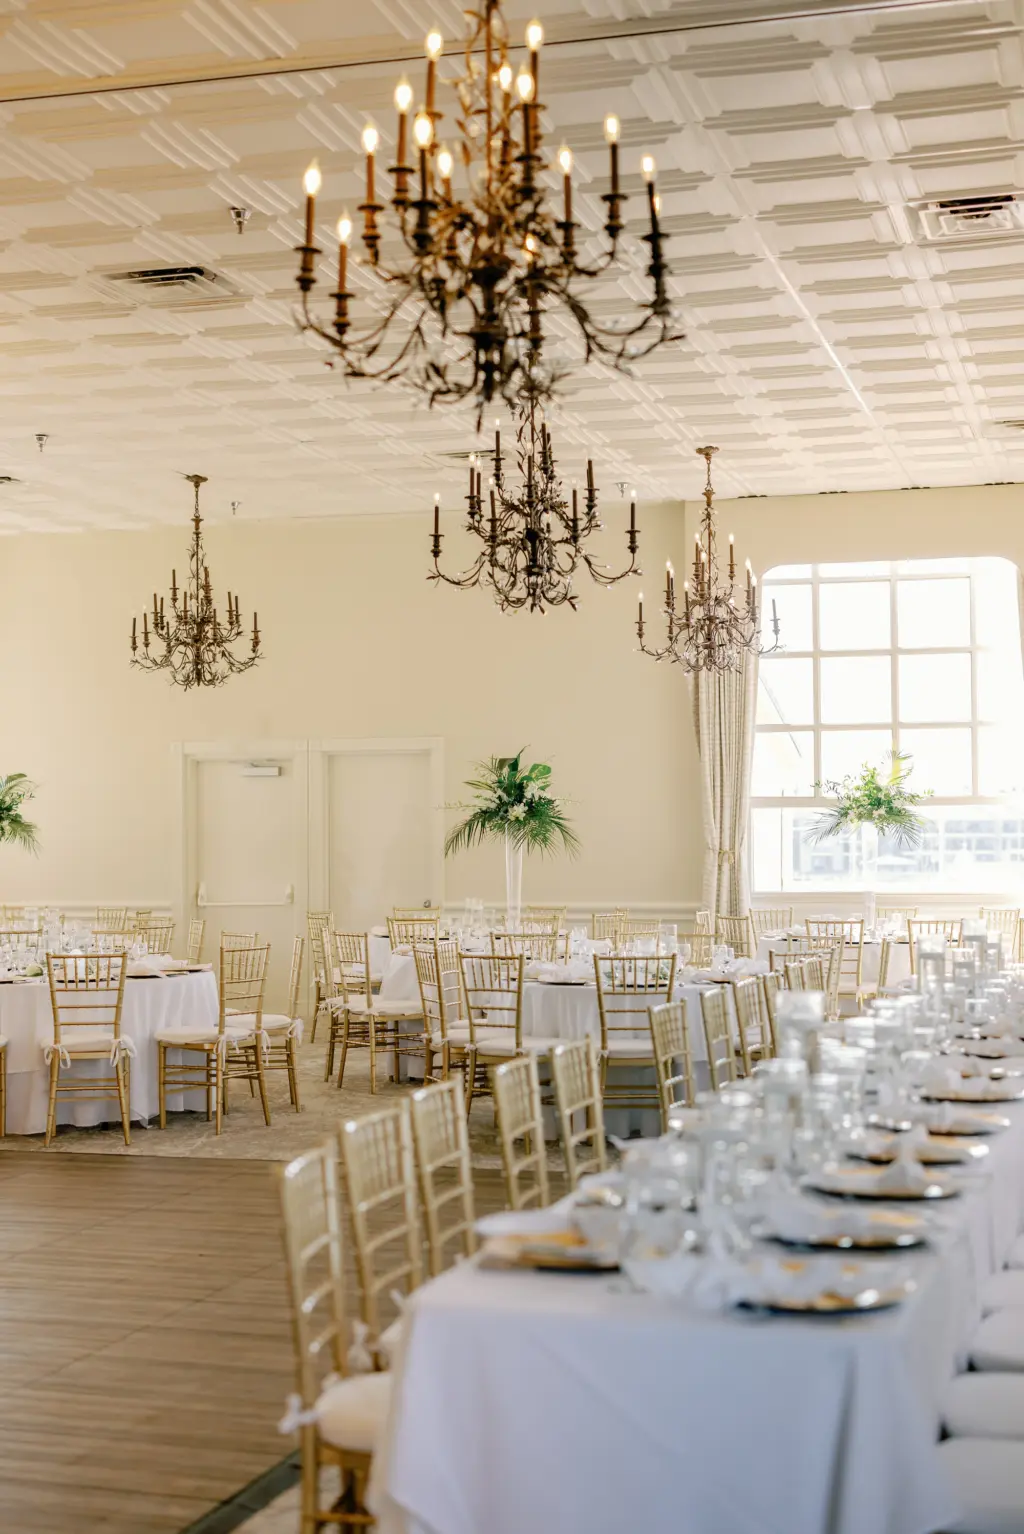 Classic Tropical Wedding Reception Decor Ideas with Gold Chiavari Chairs and Vintage Chandeliers | Bradenton Waterfront Venue Pier 22